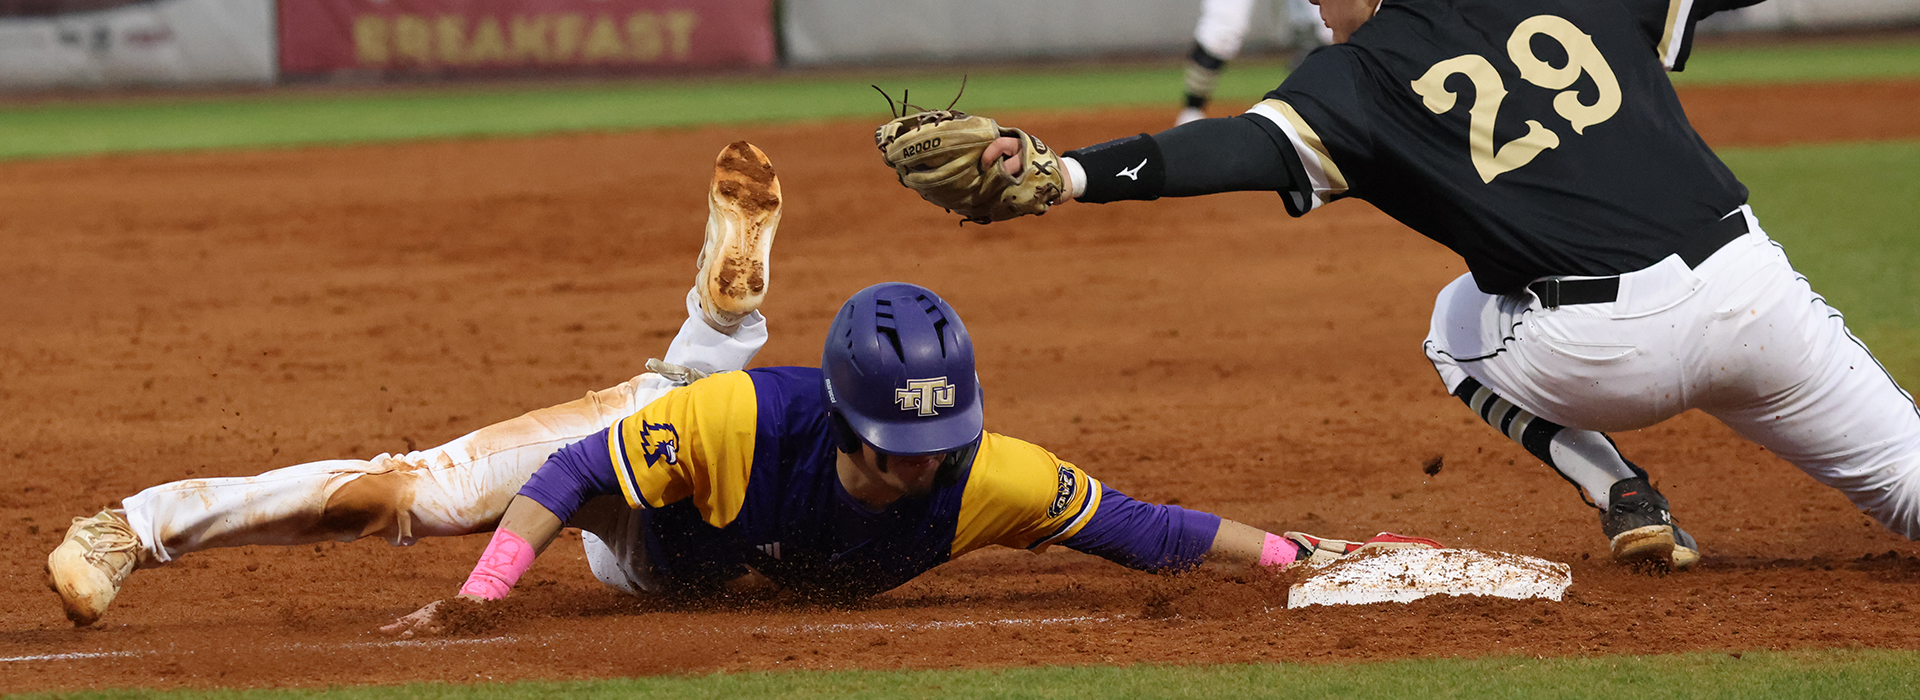 Tech heads to Nashville for midweek rematch with in-state rival Lipscomb